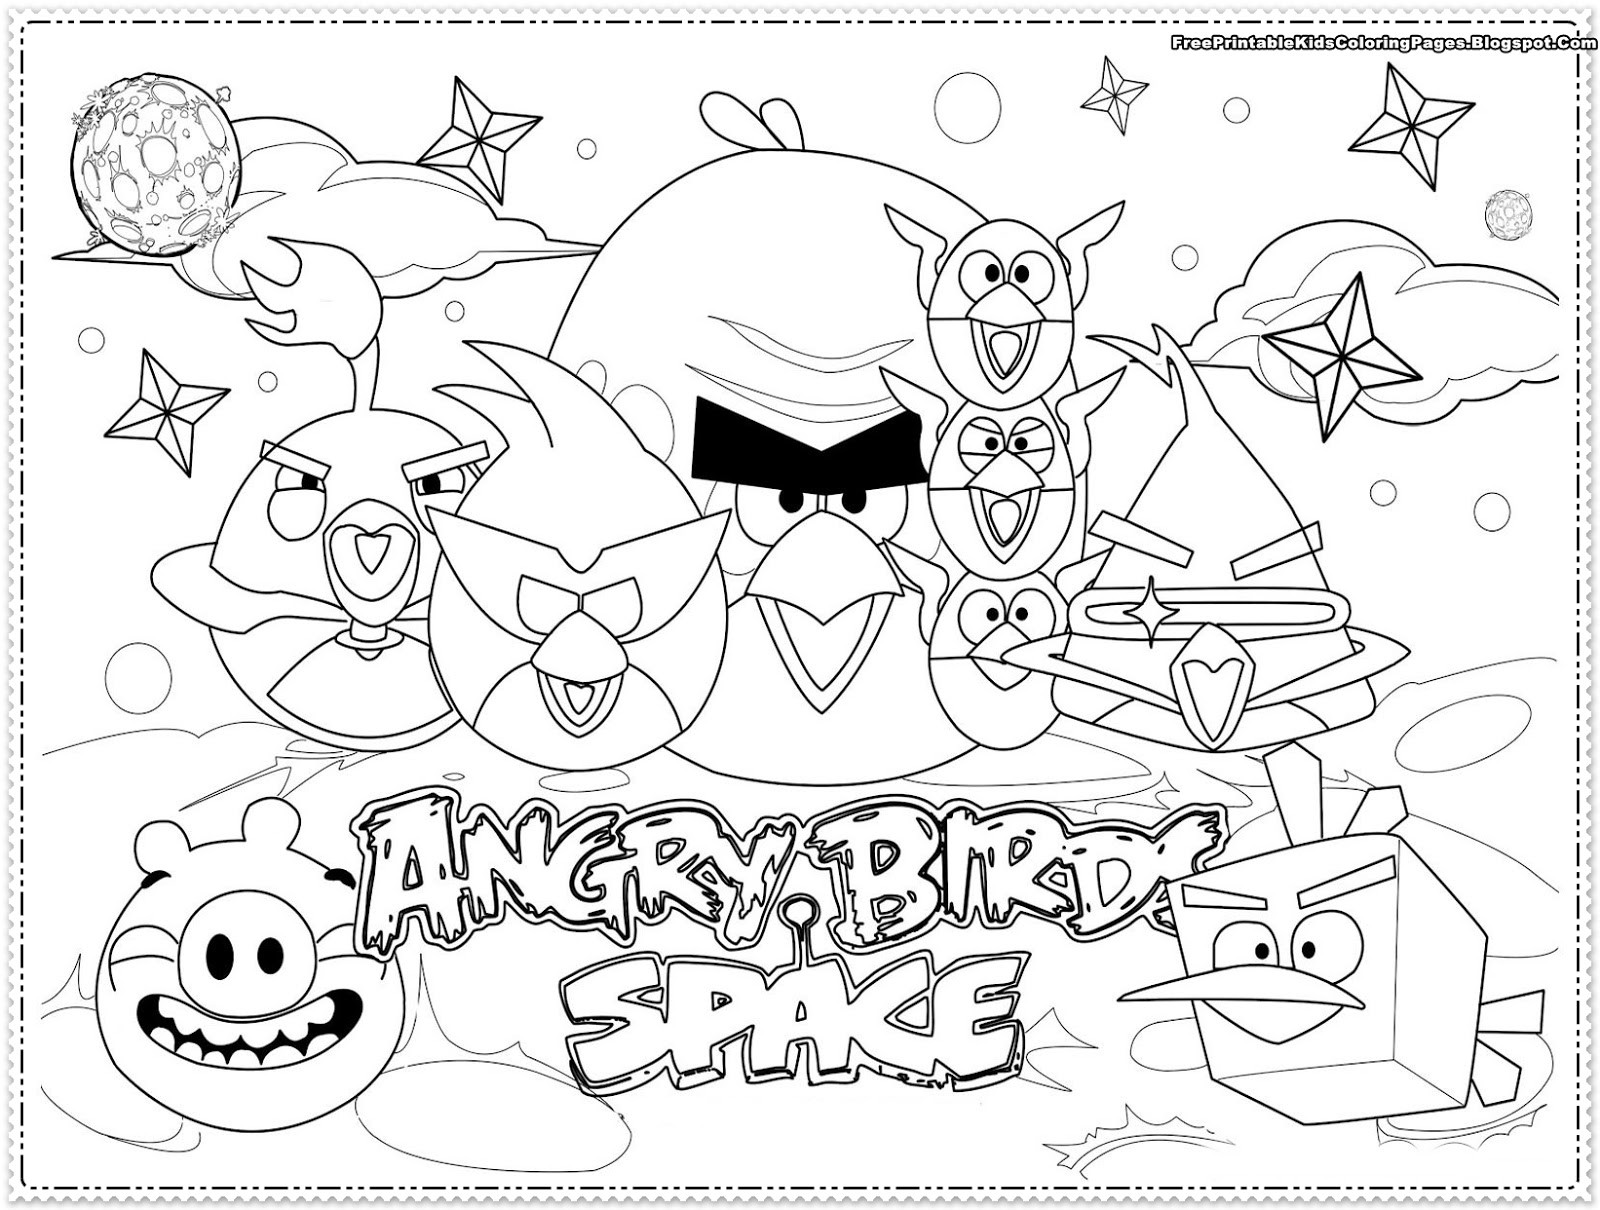 Angry Birds Printable Coloring Pages 64 with Angry Birds Printable Coloring Pages